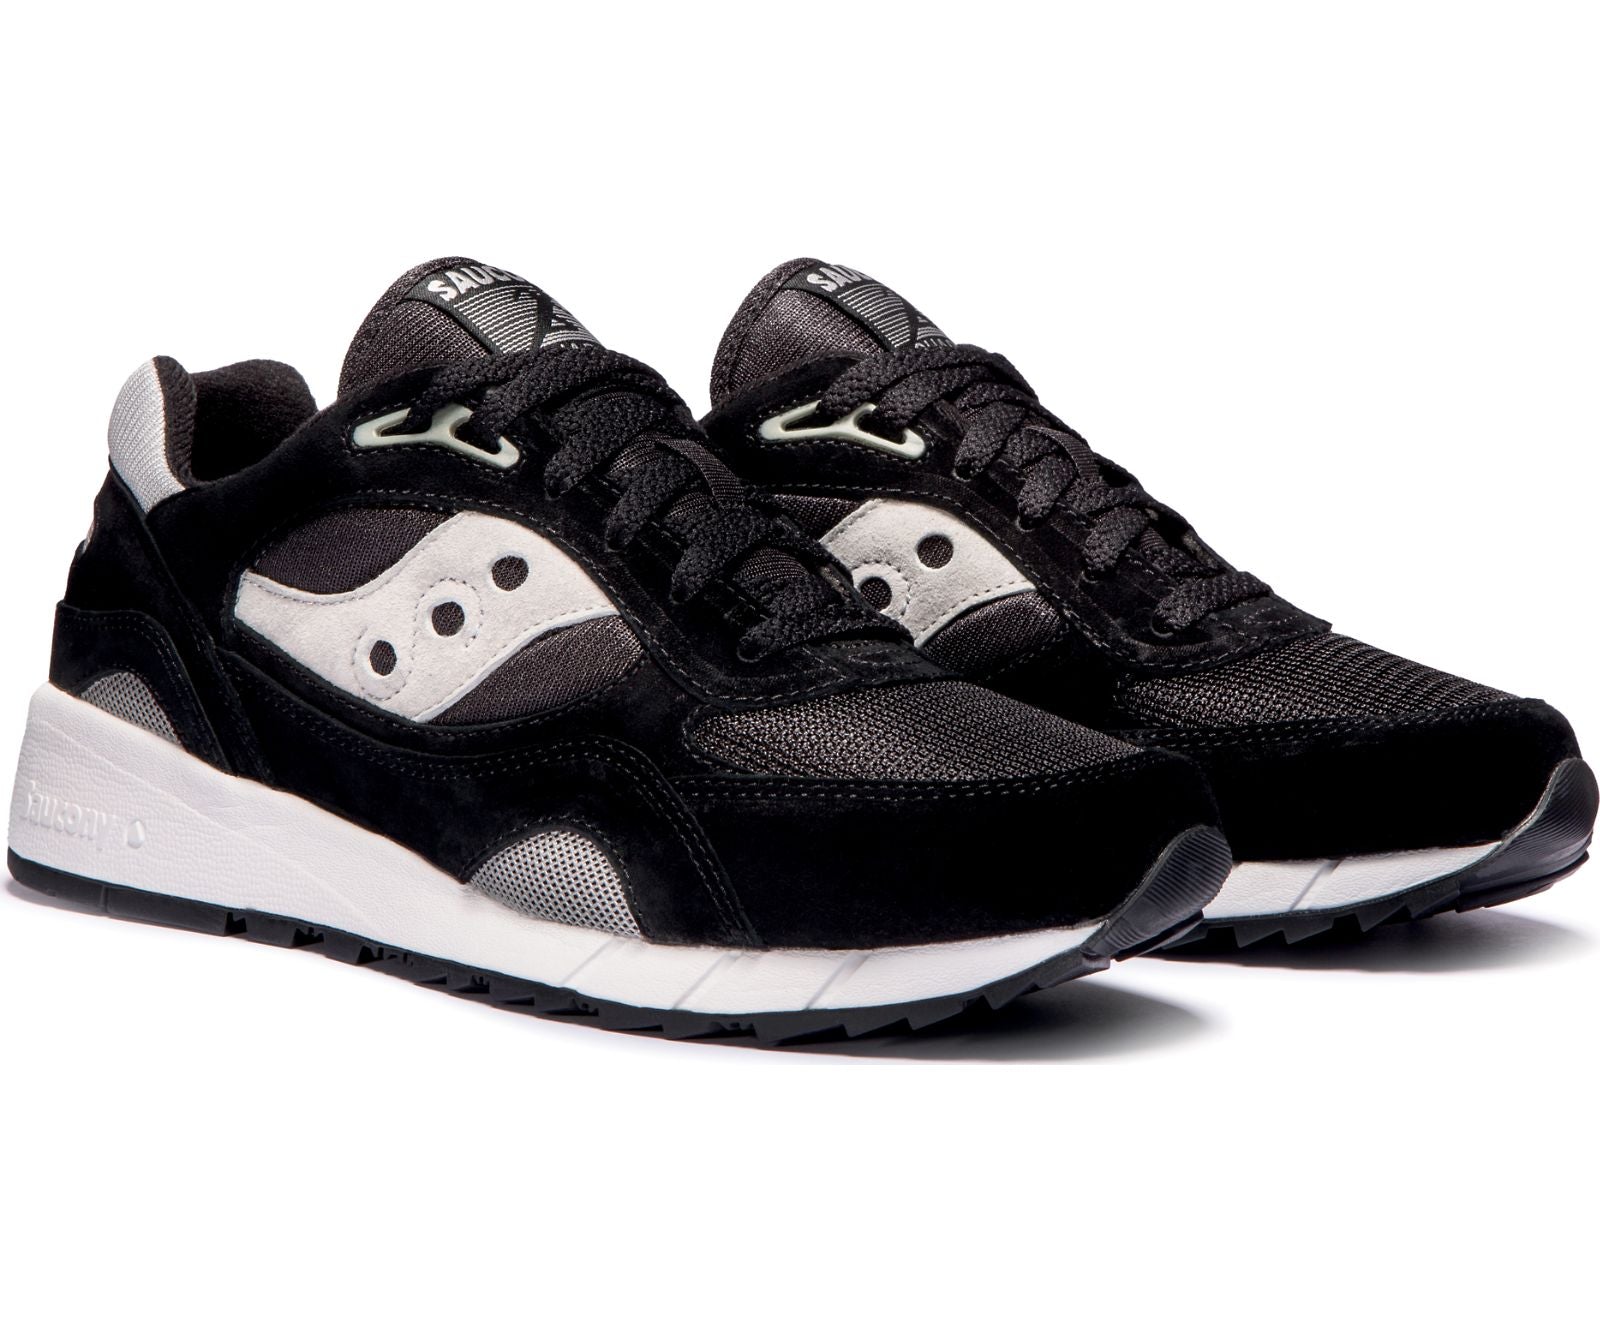 Front angle view of the Men's Saucony Shadow 6000 in Black/Silver